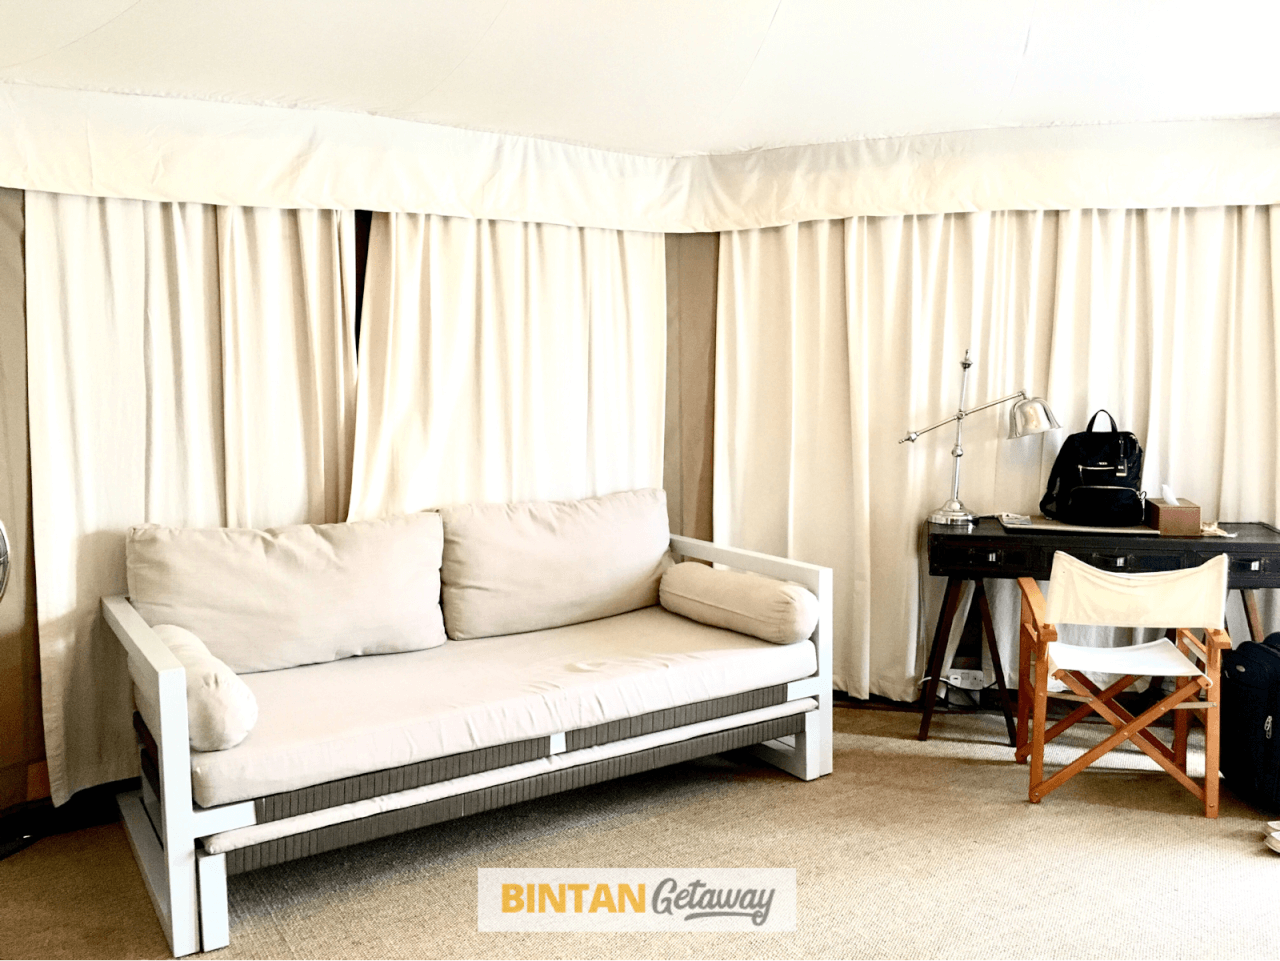 The Canopi Resort Bintan - Tent Extra Sofabed